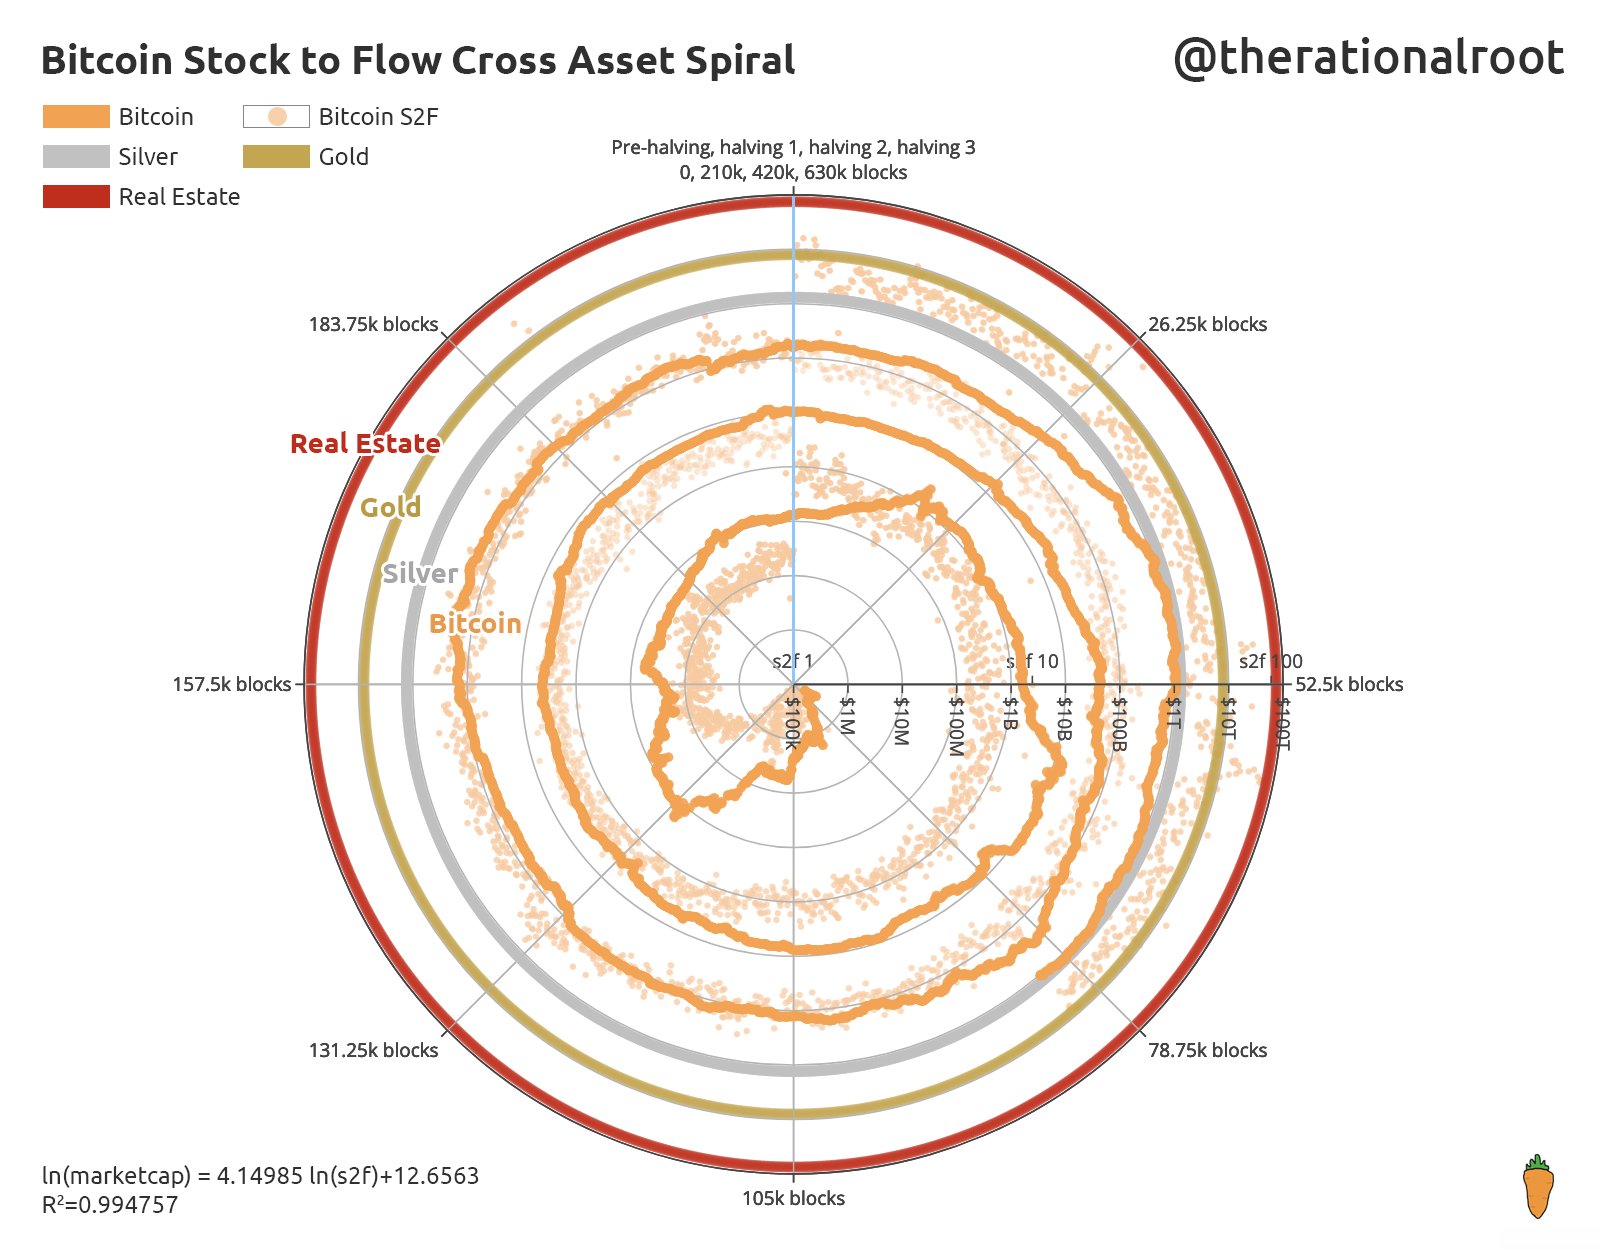 Stack-to-flow cross-asset sprial chart spiegato